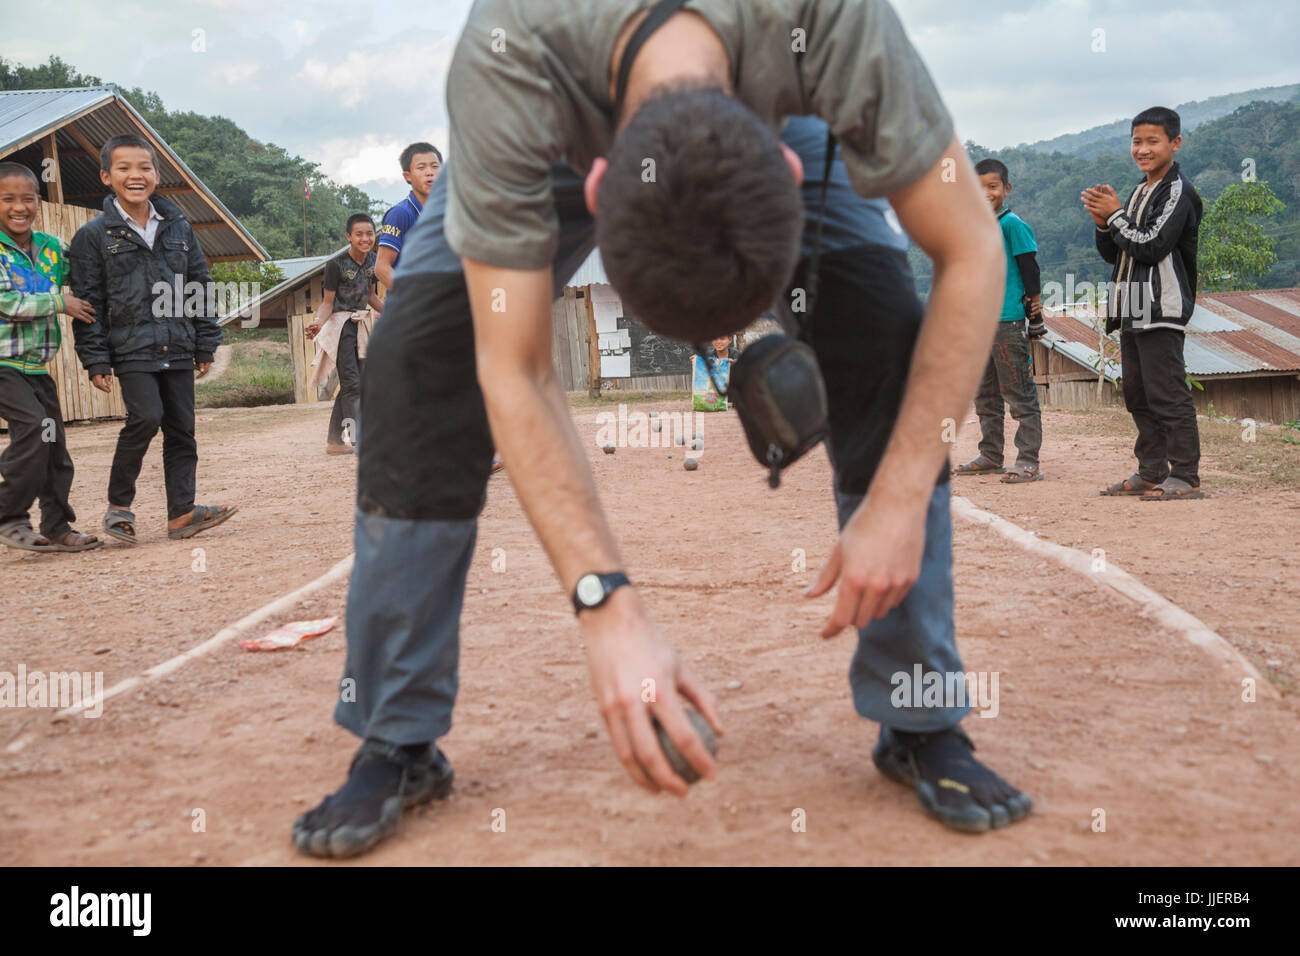 Robert Hahn plays boules (pétanque) with students at a boarding school, jokingly throwing the ball between his legs, in Ban Tang, Laos. Stock Photo